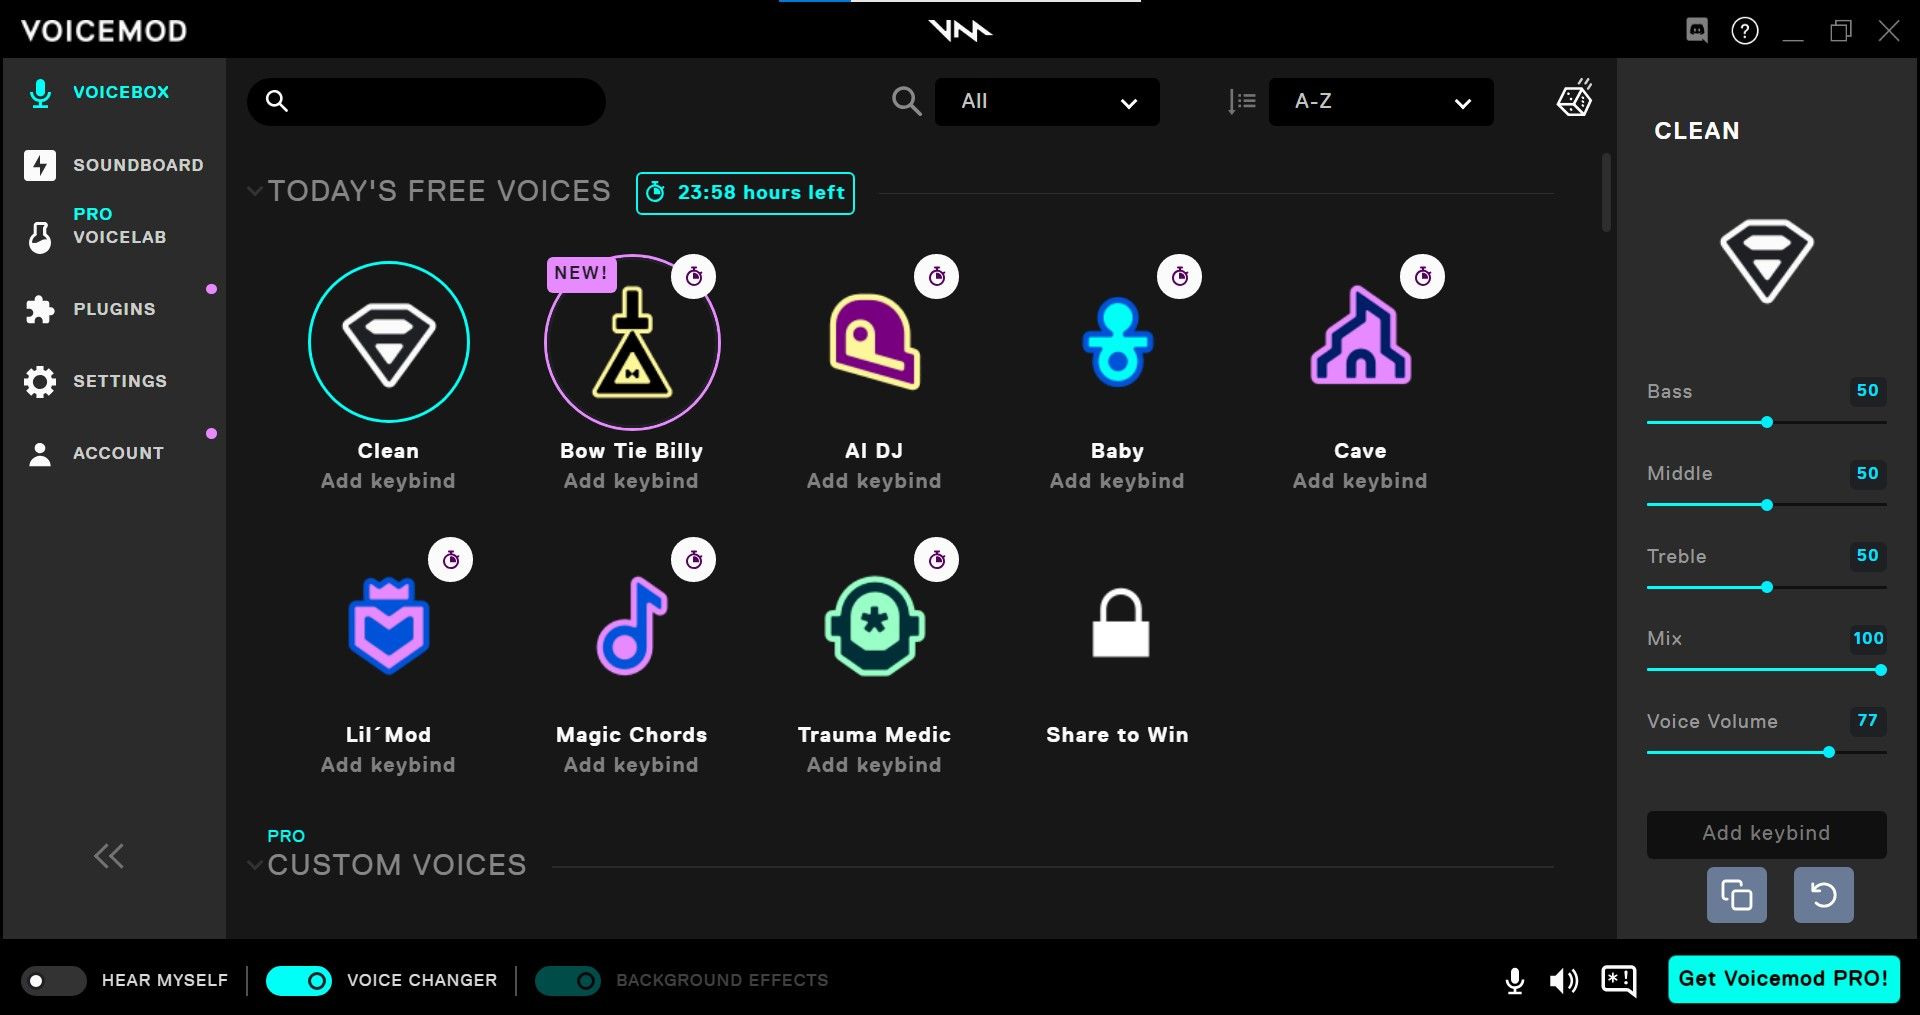 voicemod voice changer home screen showing free voices for the day